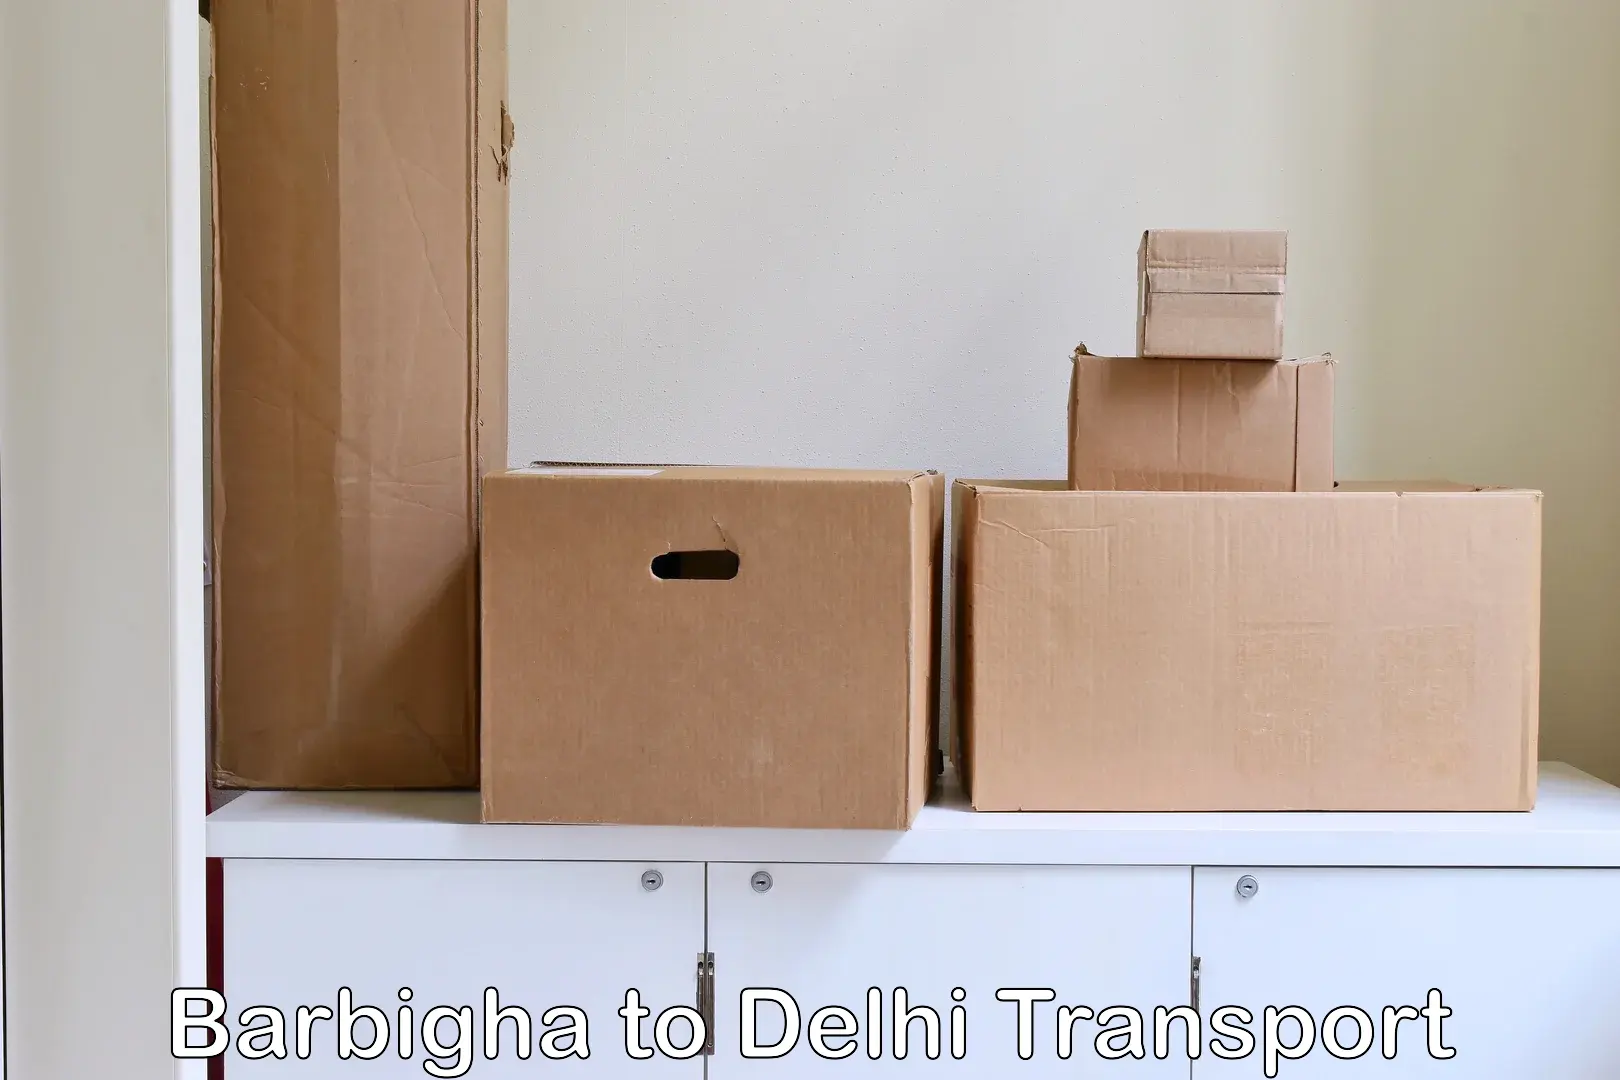 Parcel transport services Barbigha to NCR